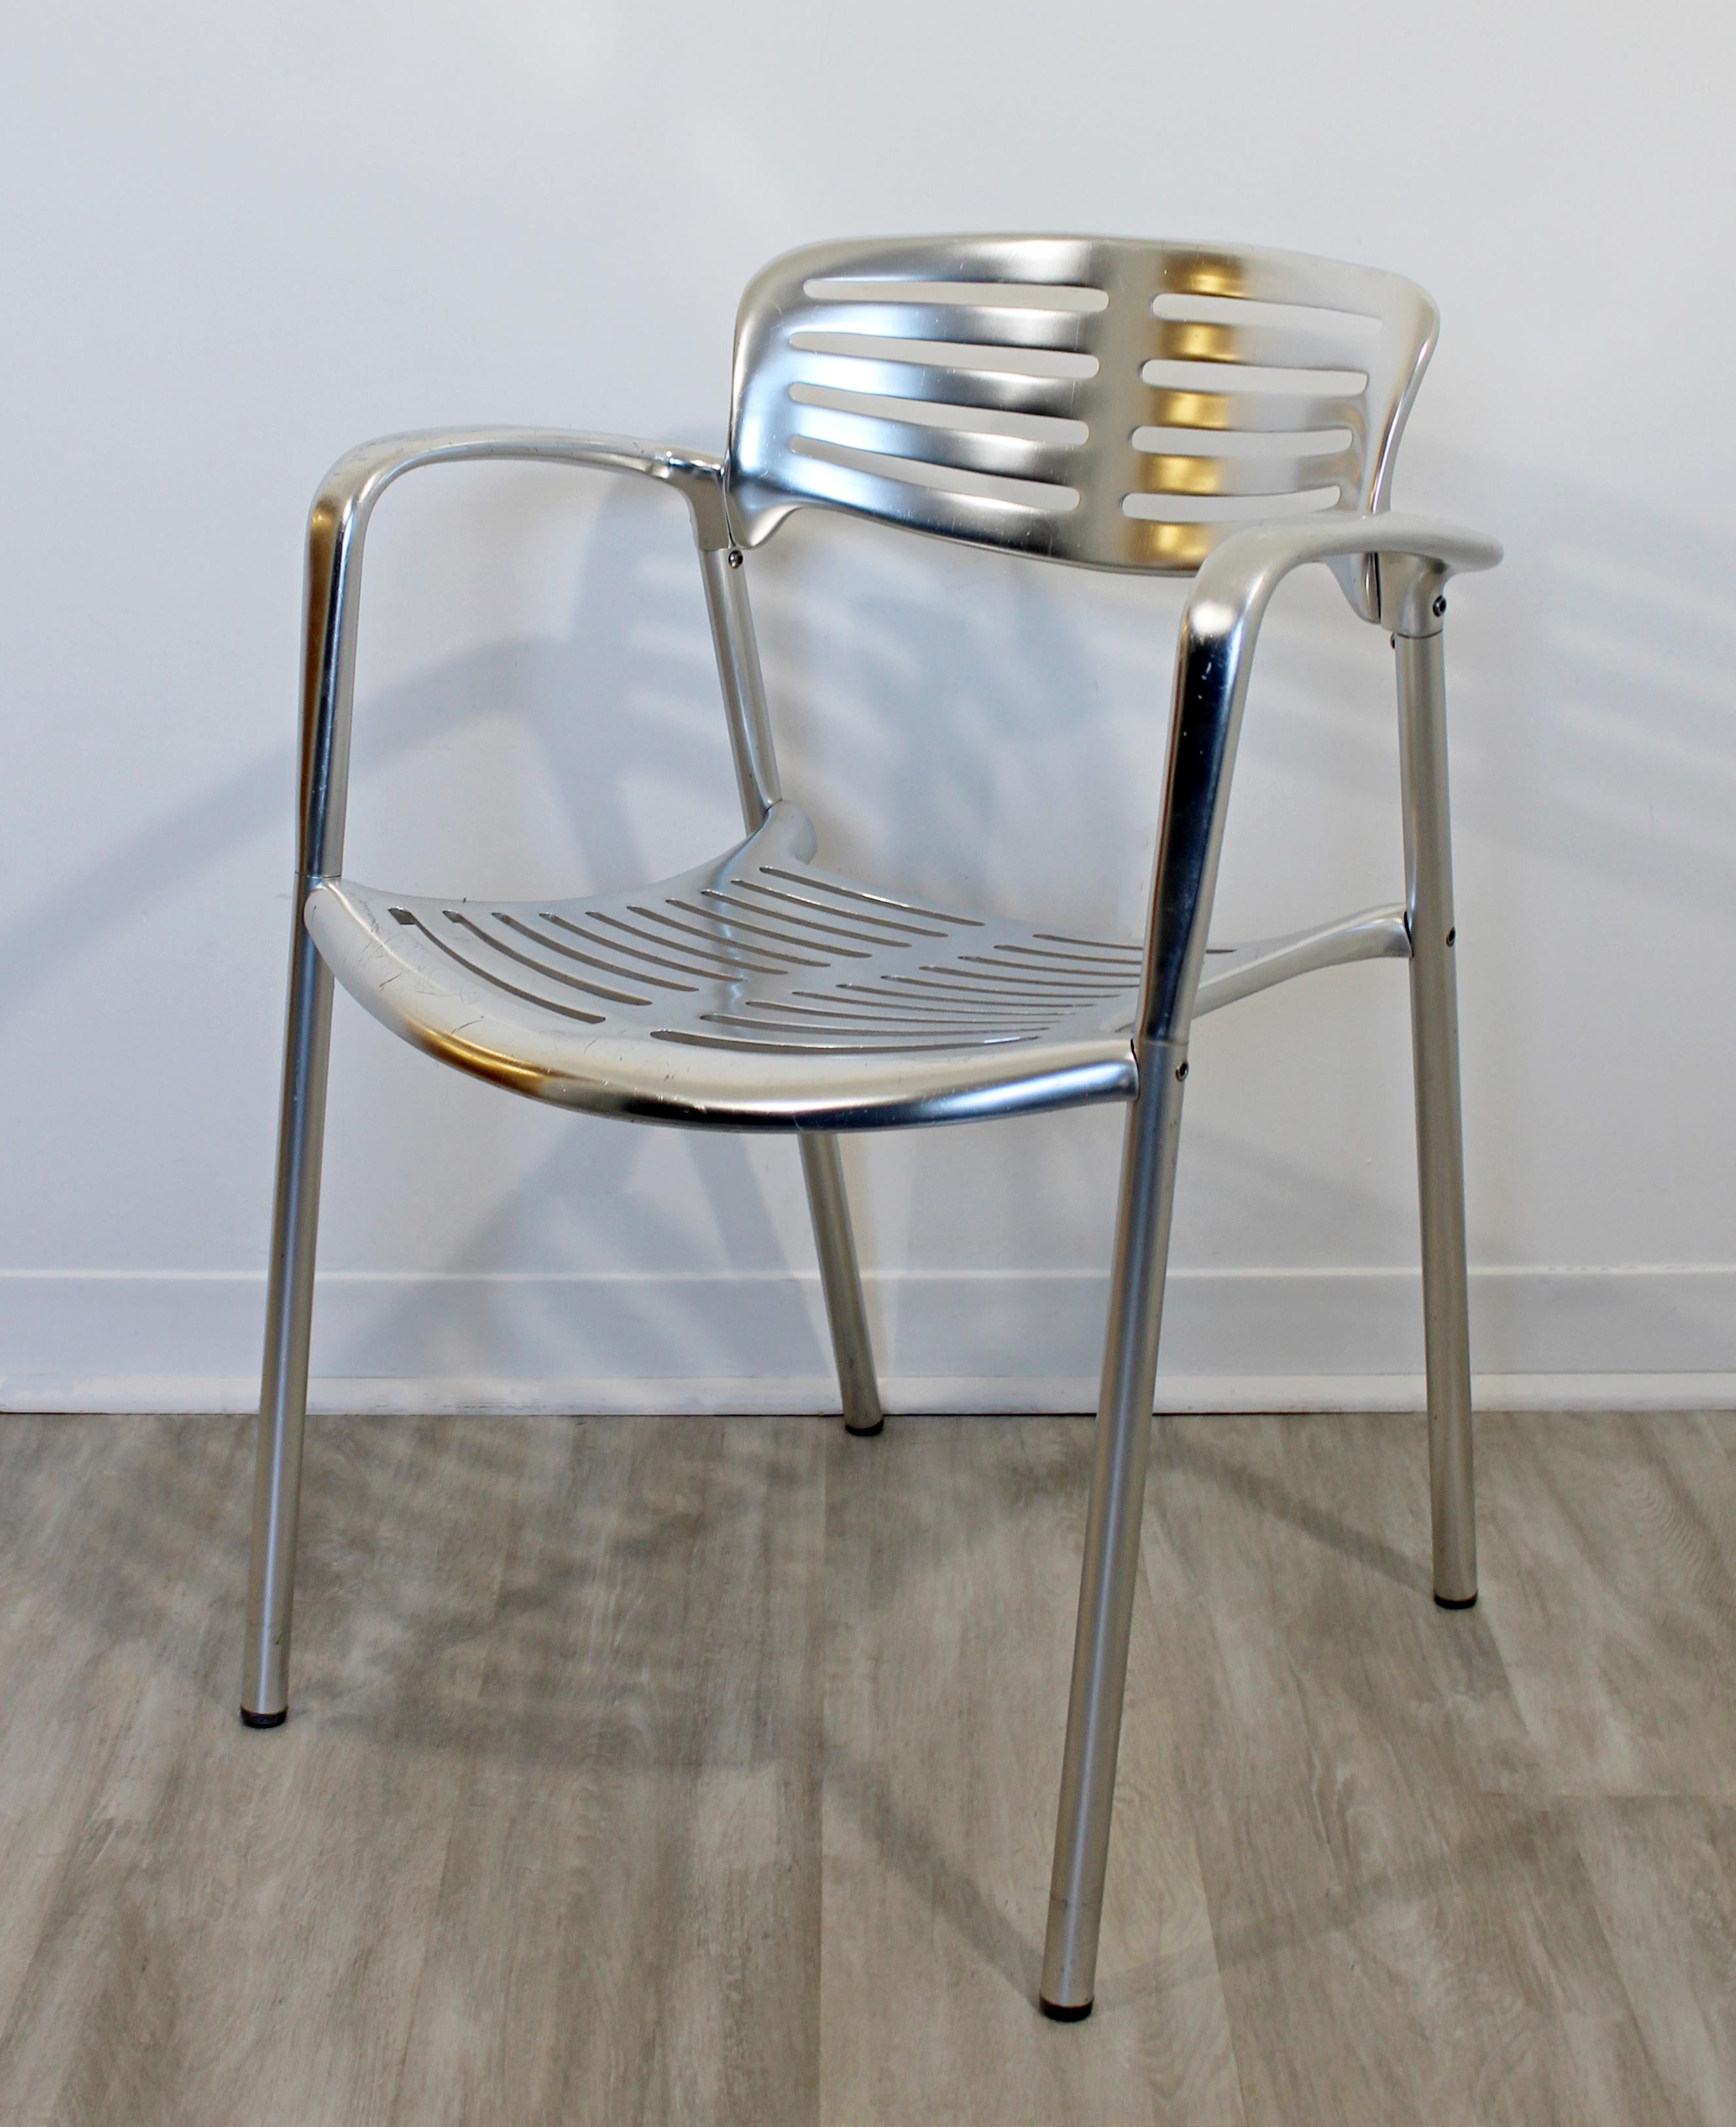 Late 20th Century Contemporary Modernist Aluminum Set of 8 Chairs Toledo by Jorge Pensi, Spain